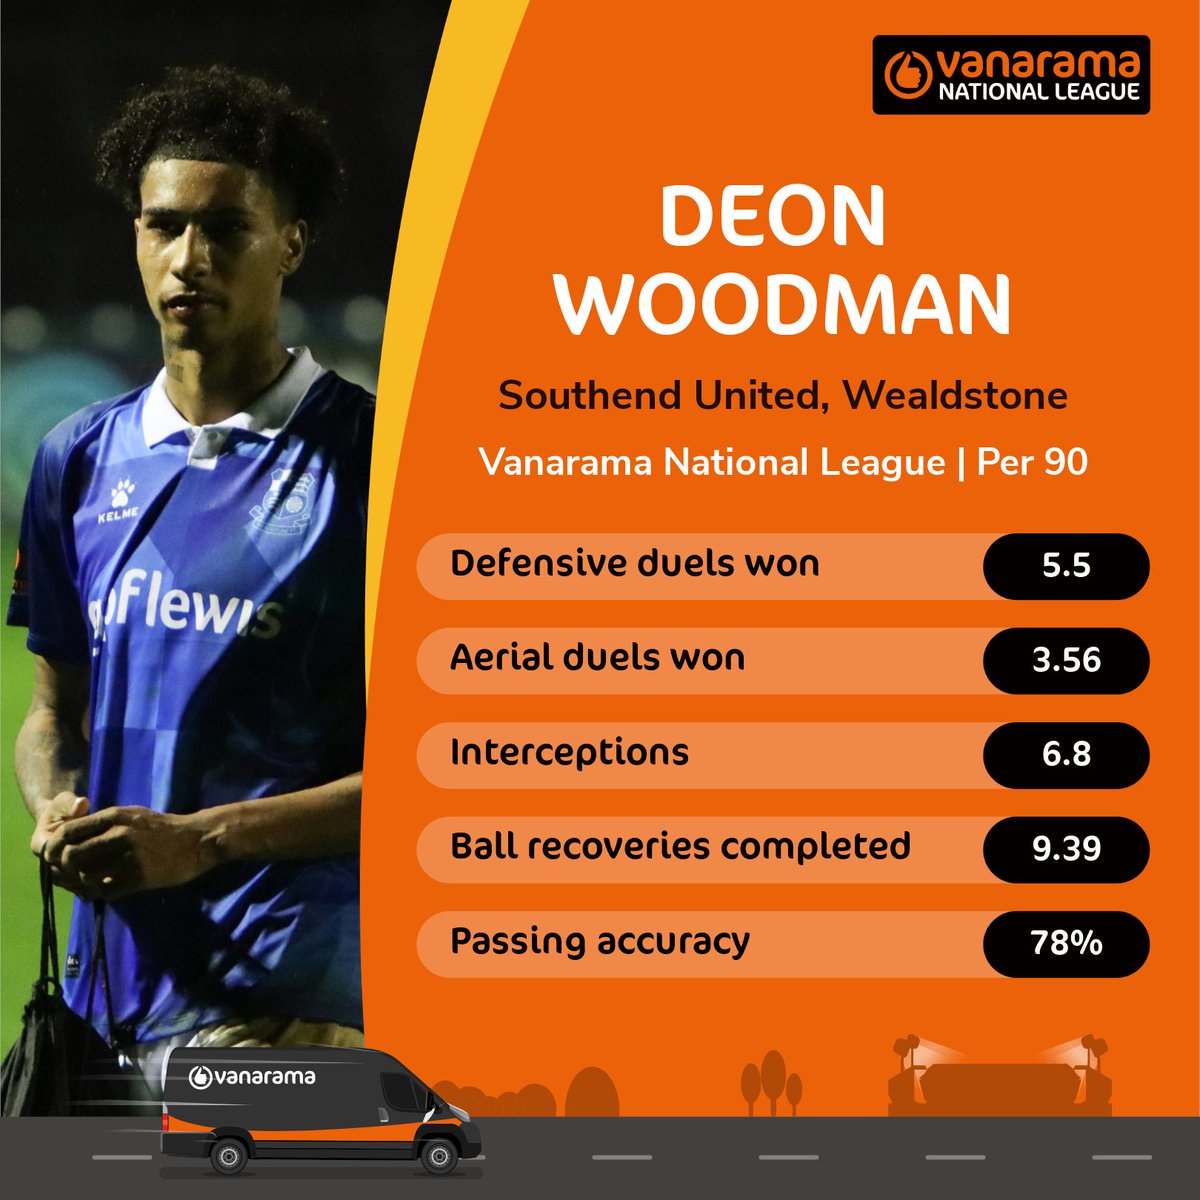 He only played twice on loan at @WealdstoneFC last season 💙 But @Deonwoodman1 made a big impression and now he's back 𝙥𝙚𝙧𝙢𝙖𝙣𝙚𝙣𝙩𝙡𝙮 ✍️ 📸 @ronnieraffle #TheVanarama | @TheVanaramaNL